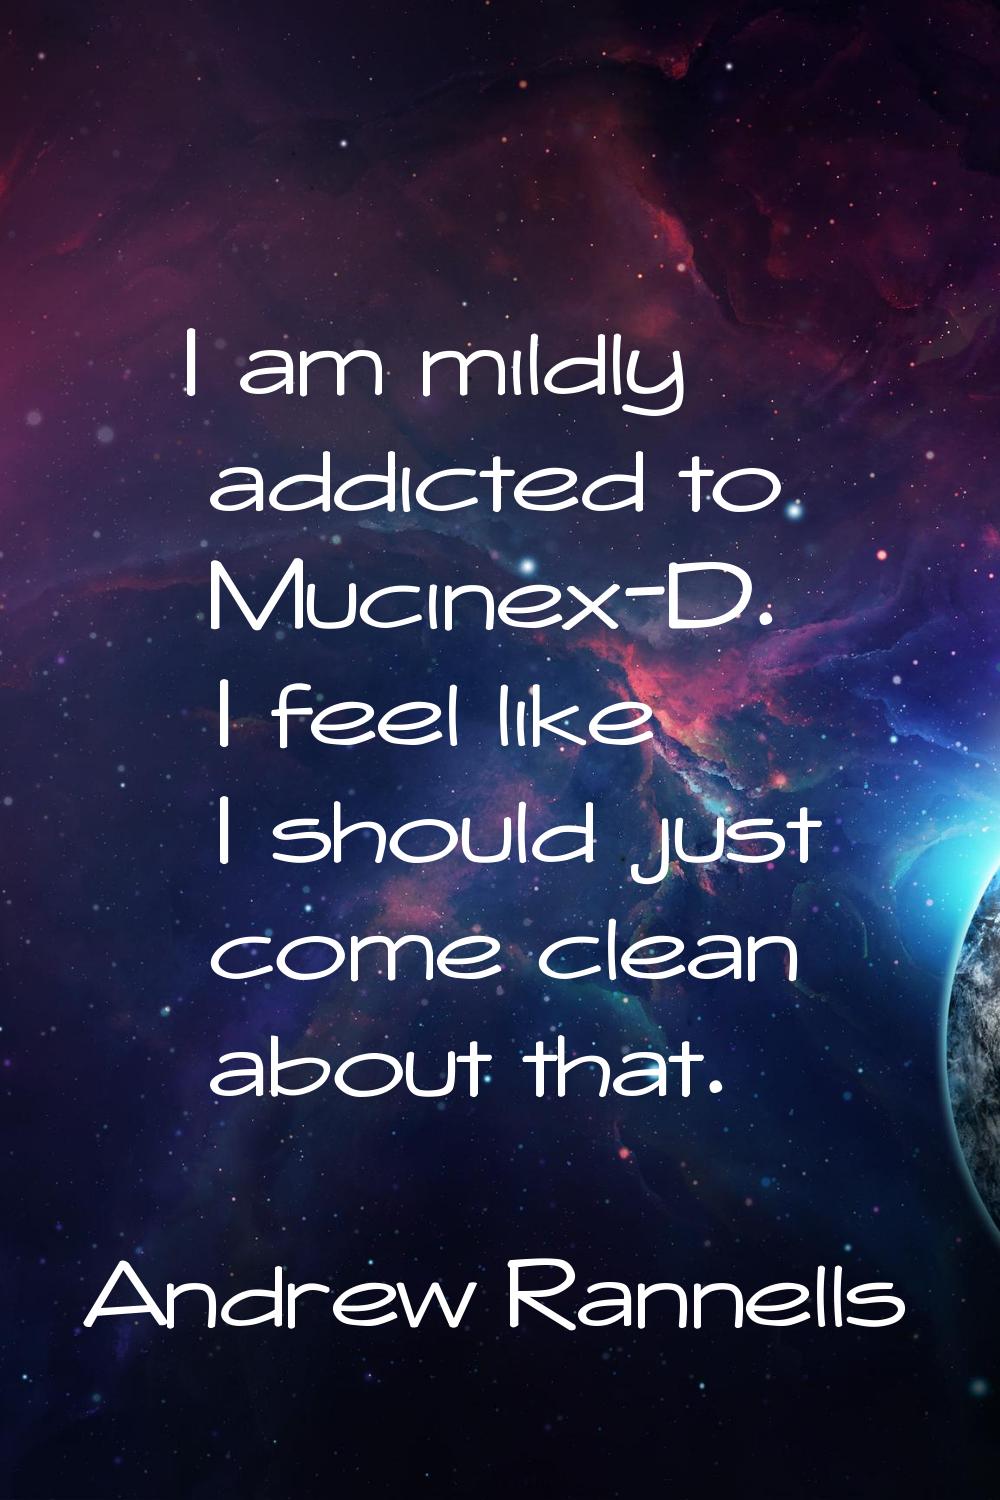 I am mildly addicted to Mucinex-D. I feel like I should just come clean about that.